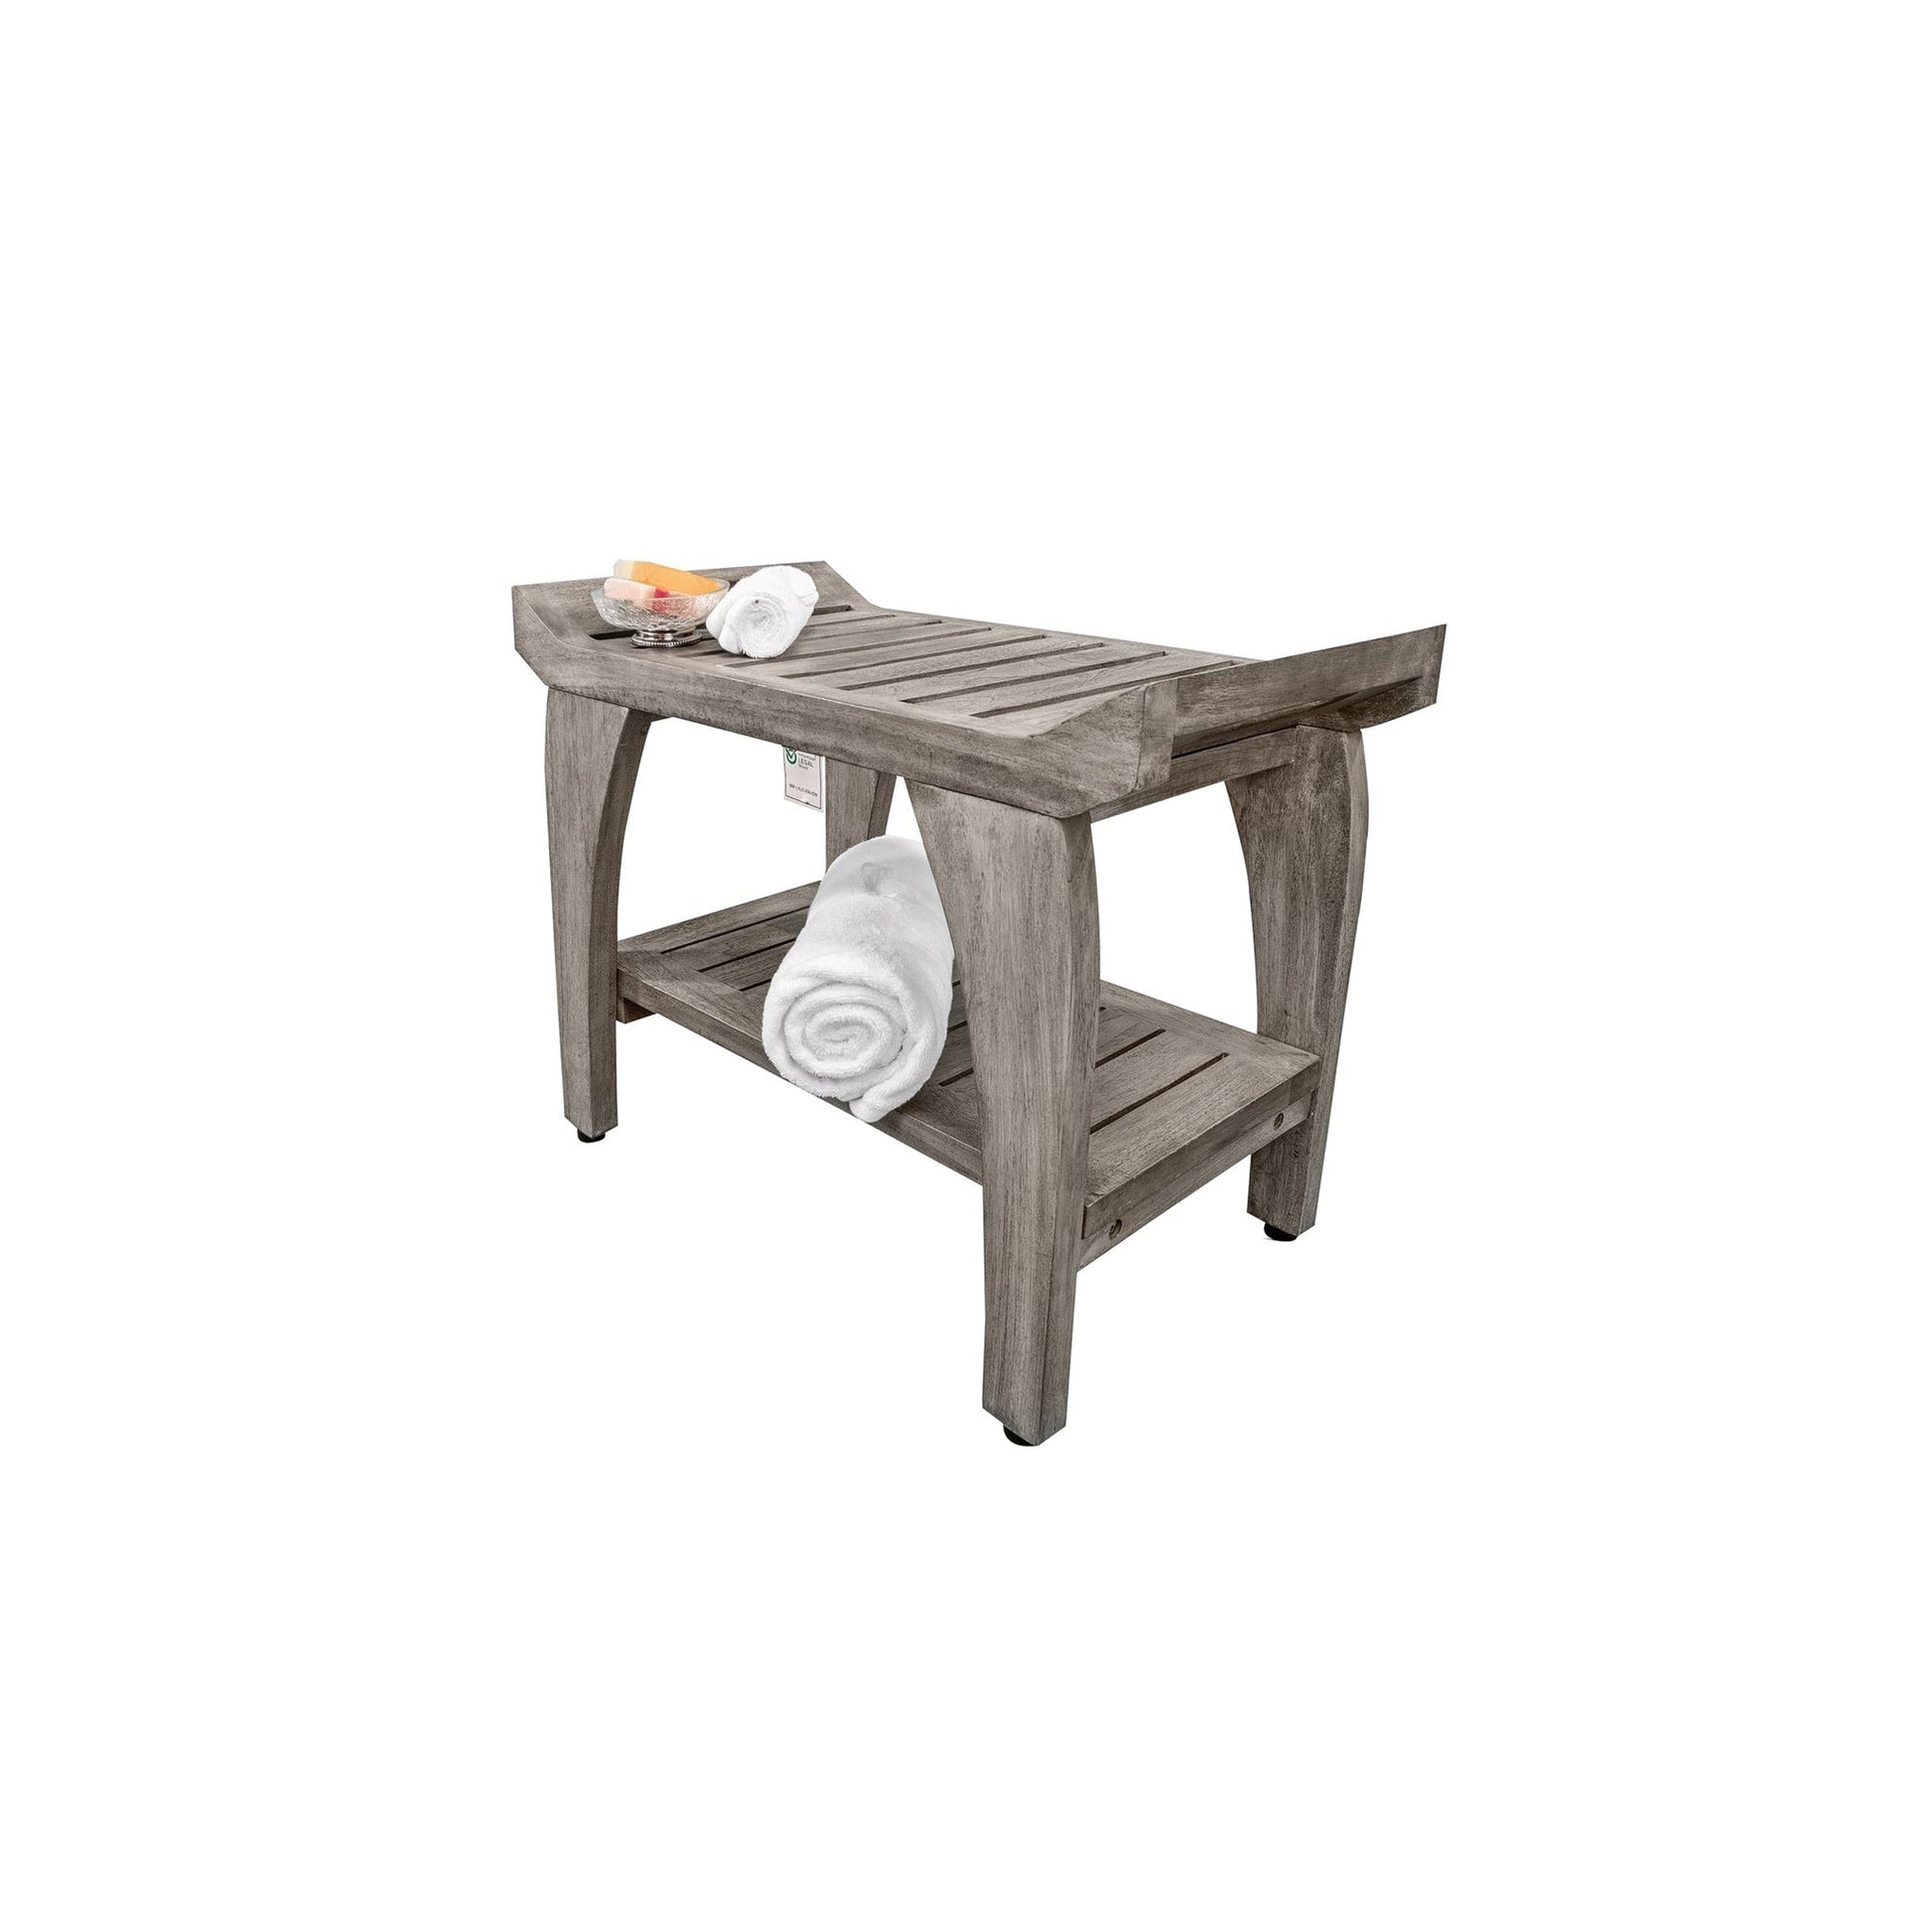 CoastalVouge Tranquility 24" Antique Gray Solid Teak Wood Shower Bench With Shelf and LiftAide Arms